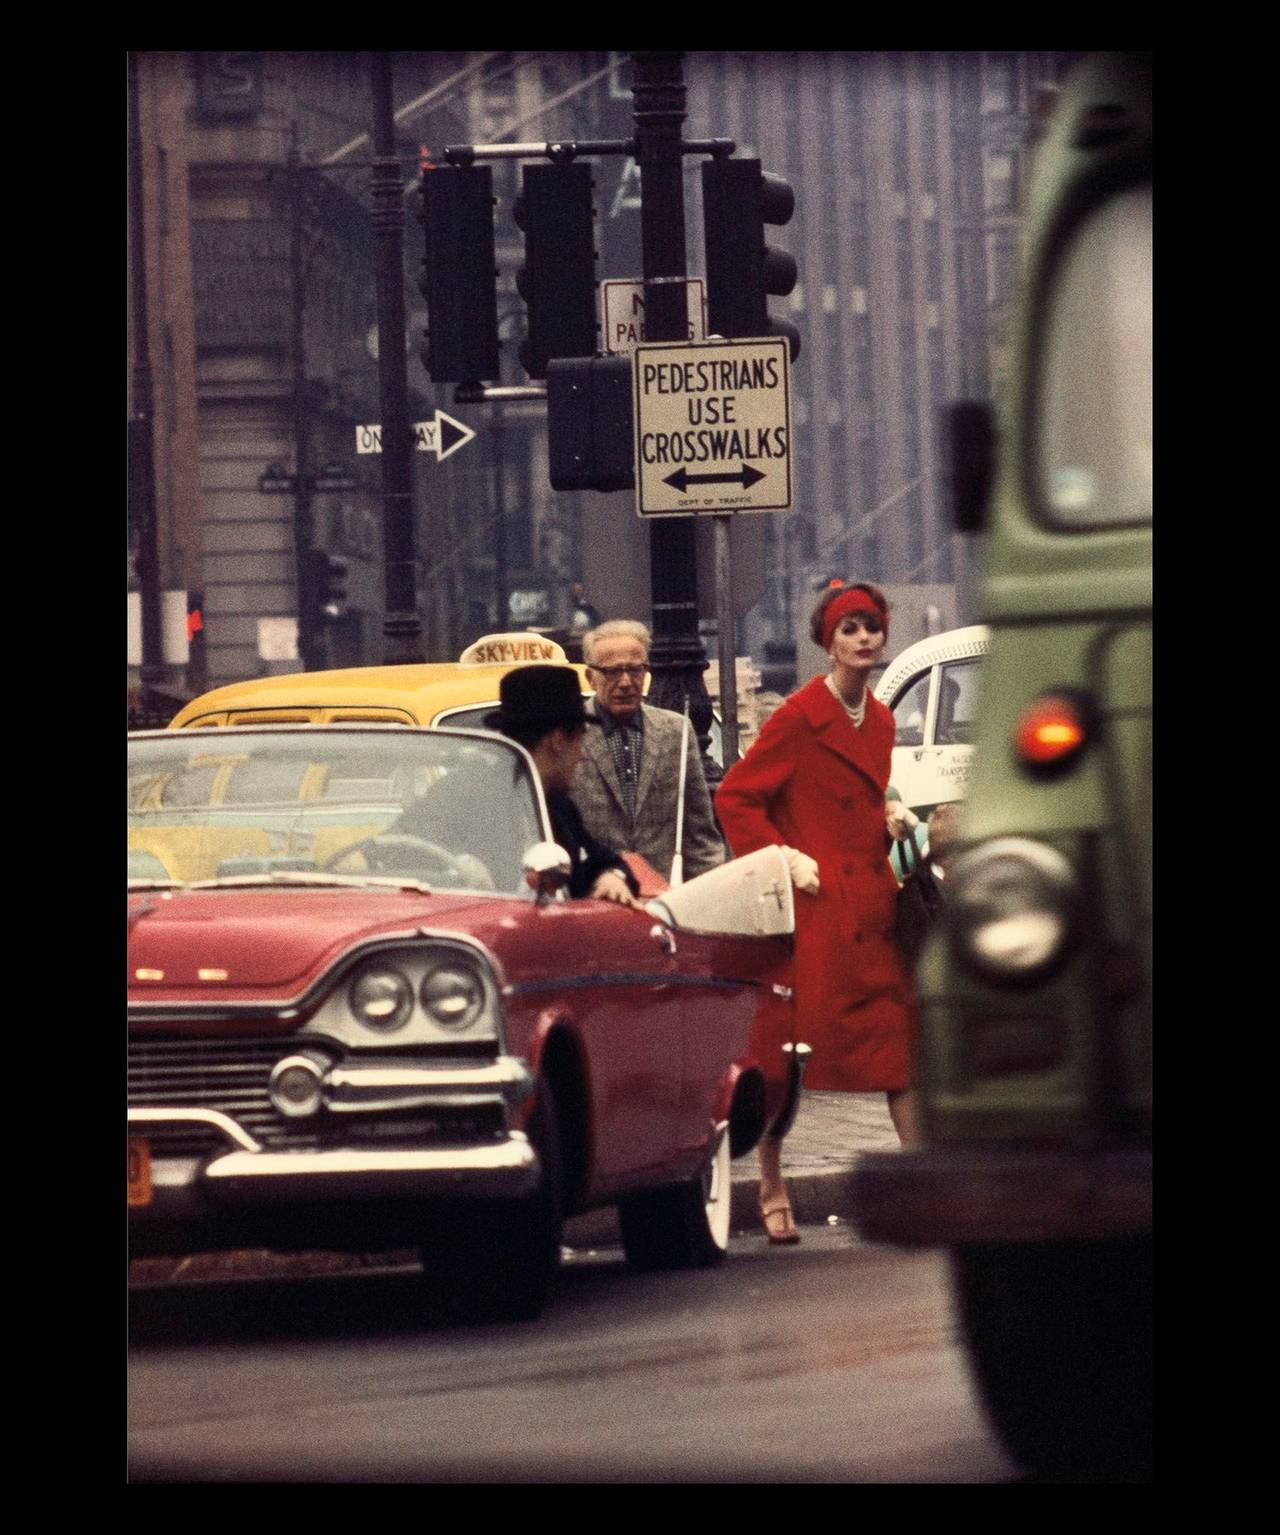 William Klein Color Photograph - Anne St. Marie + Cruiser in Traffic, NY (Vogue)